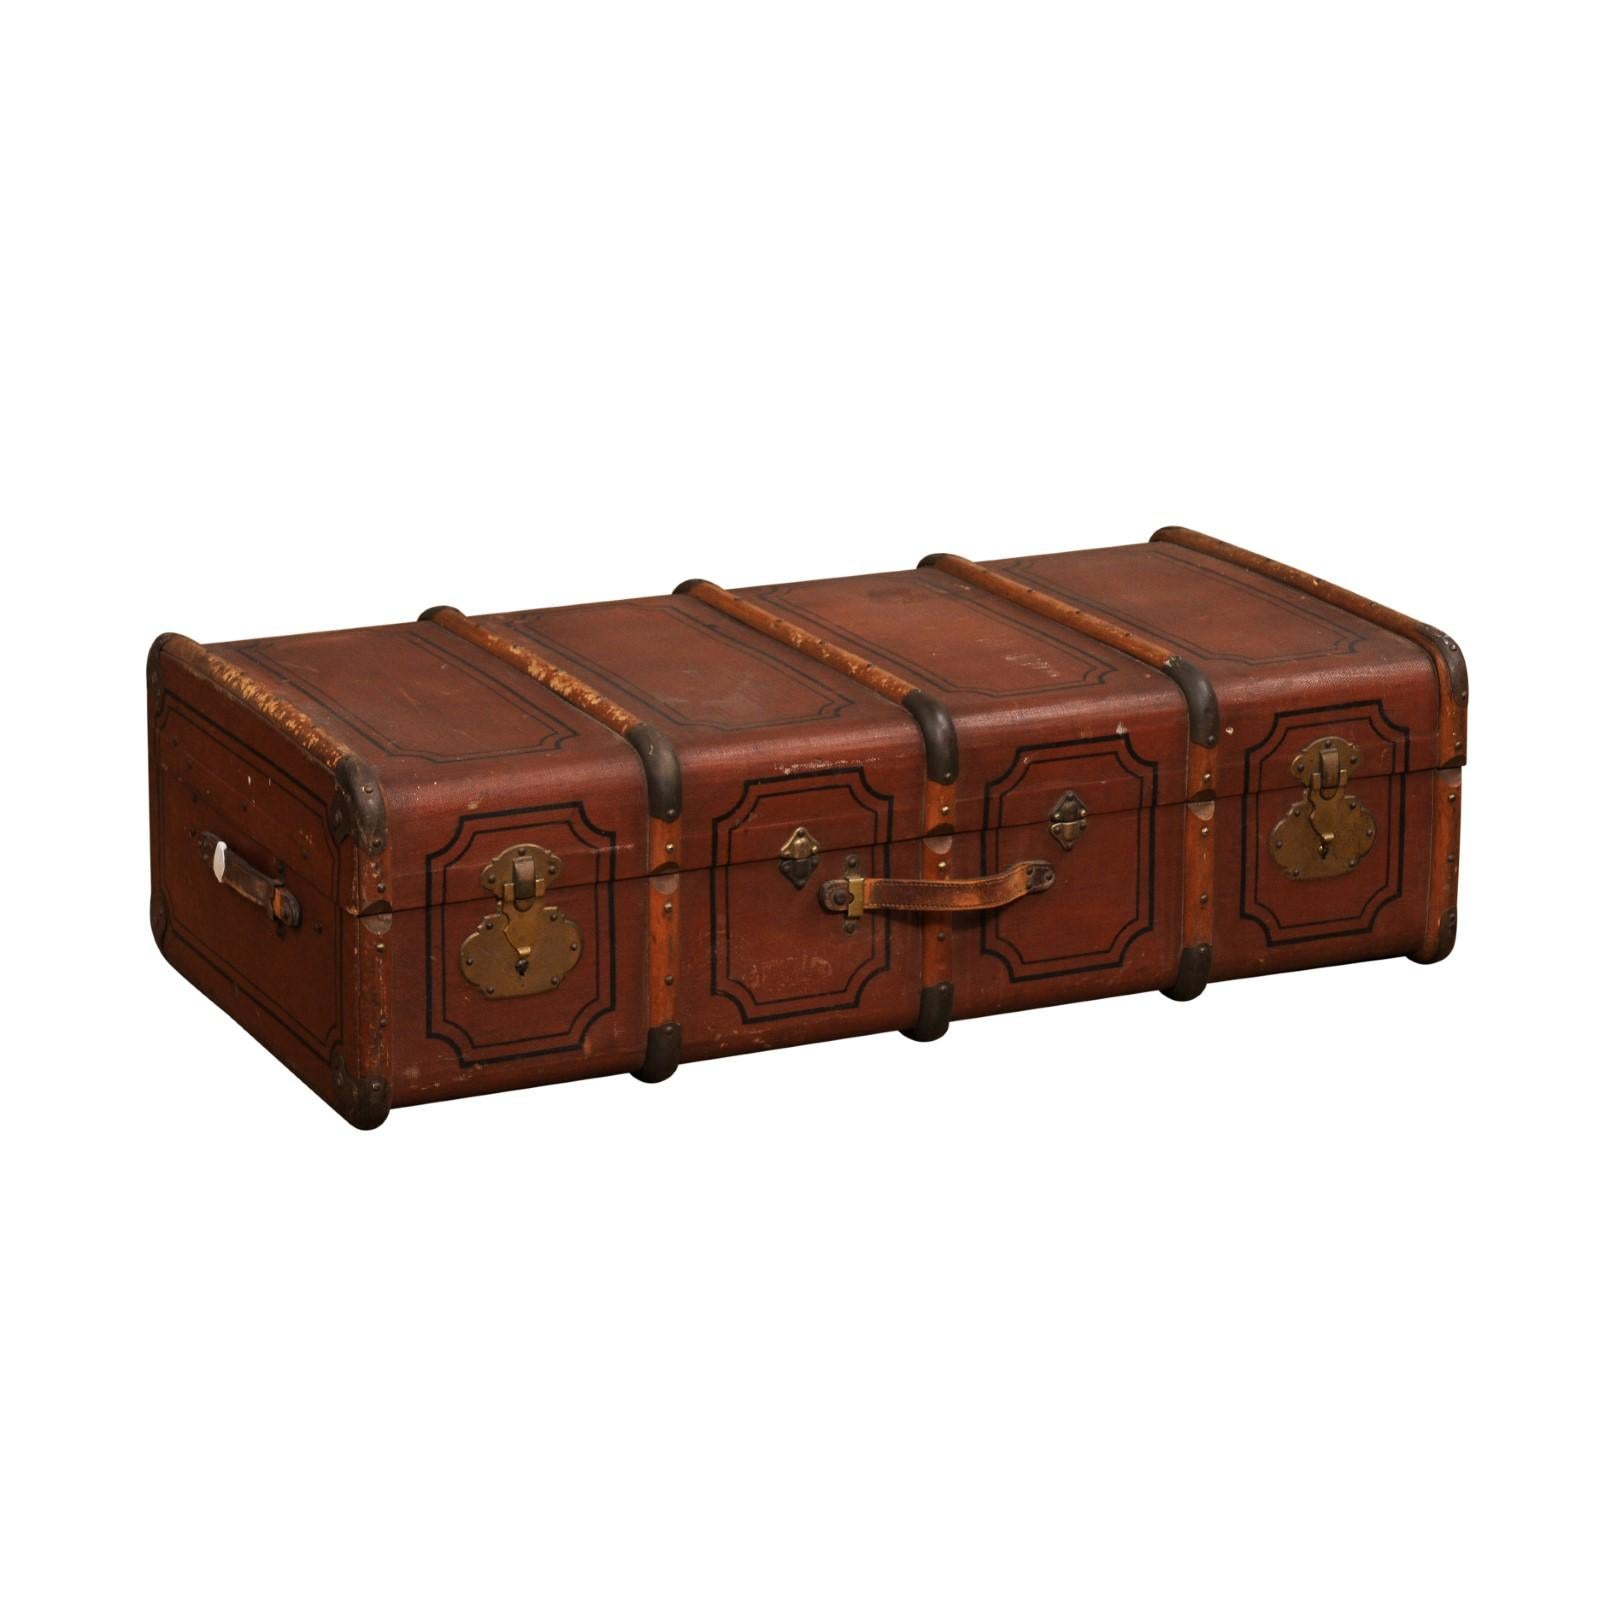 An Italian leather and wood travel trunk from the 20th century with lined interior, removable compartment, brass accents and great rustic character. Created in Italy during the 20th century, this leather and wood travel trunk will make for a